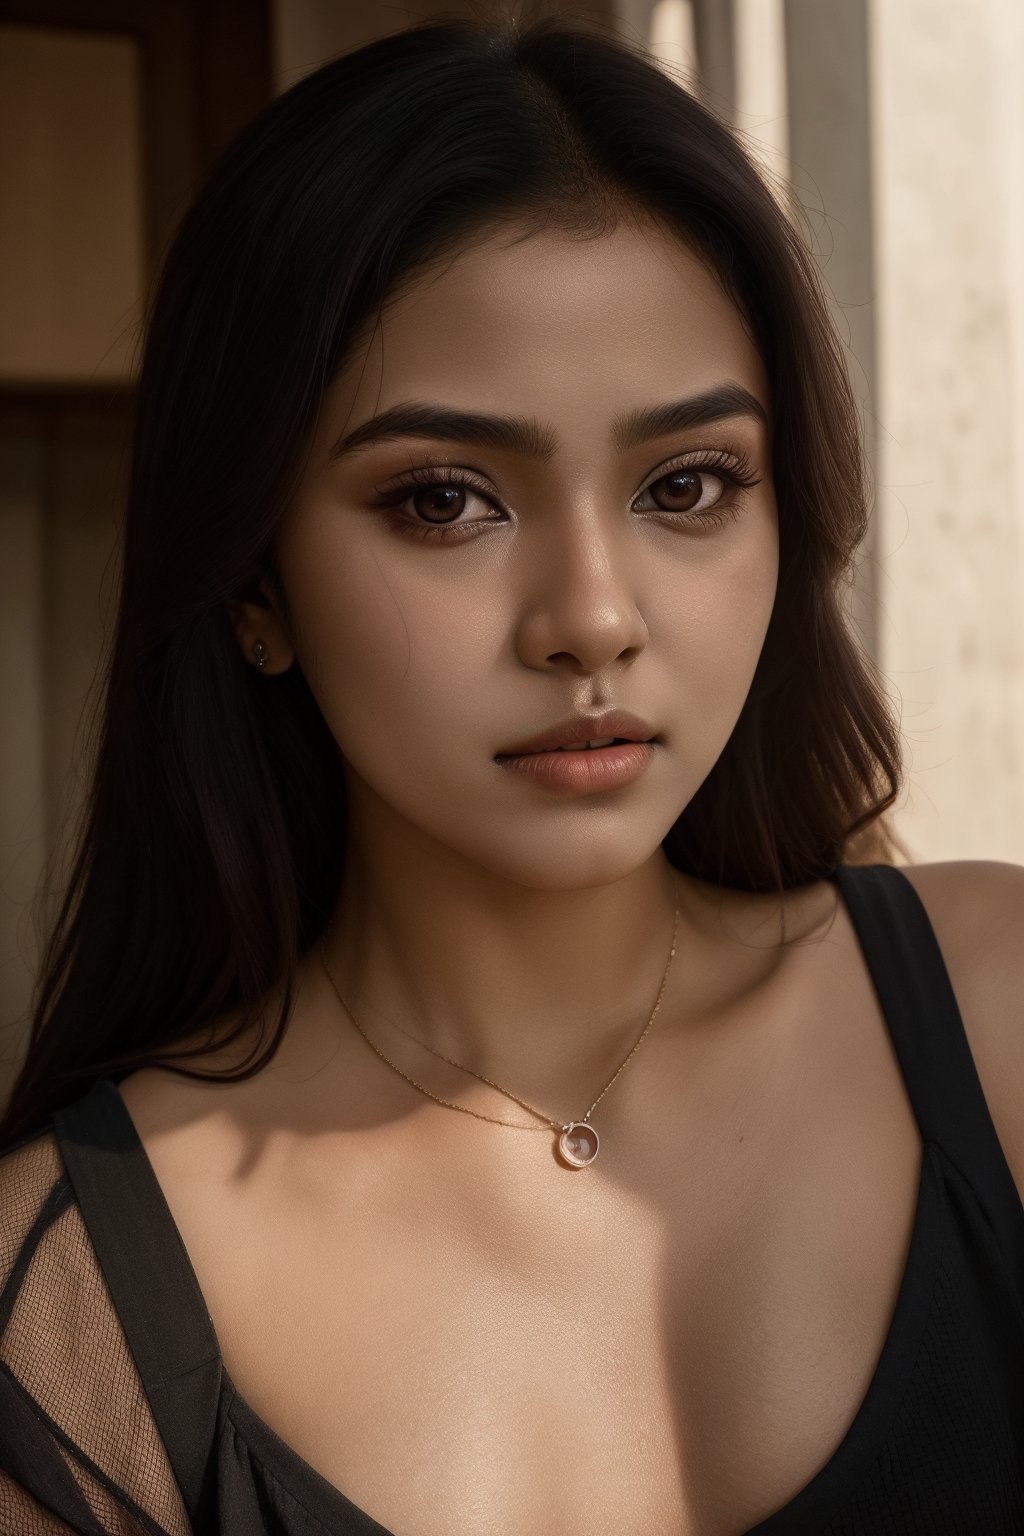 "Same face girl name Aria, round face, very dark Indian girl, Instagram influencer, black long hair, shiny juicy lips, brown eyes cute, 18 year old girl, photorealistic, portrait, extreme realism, spending time with friends."